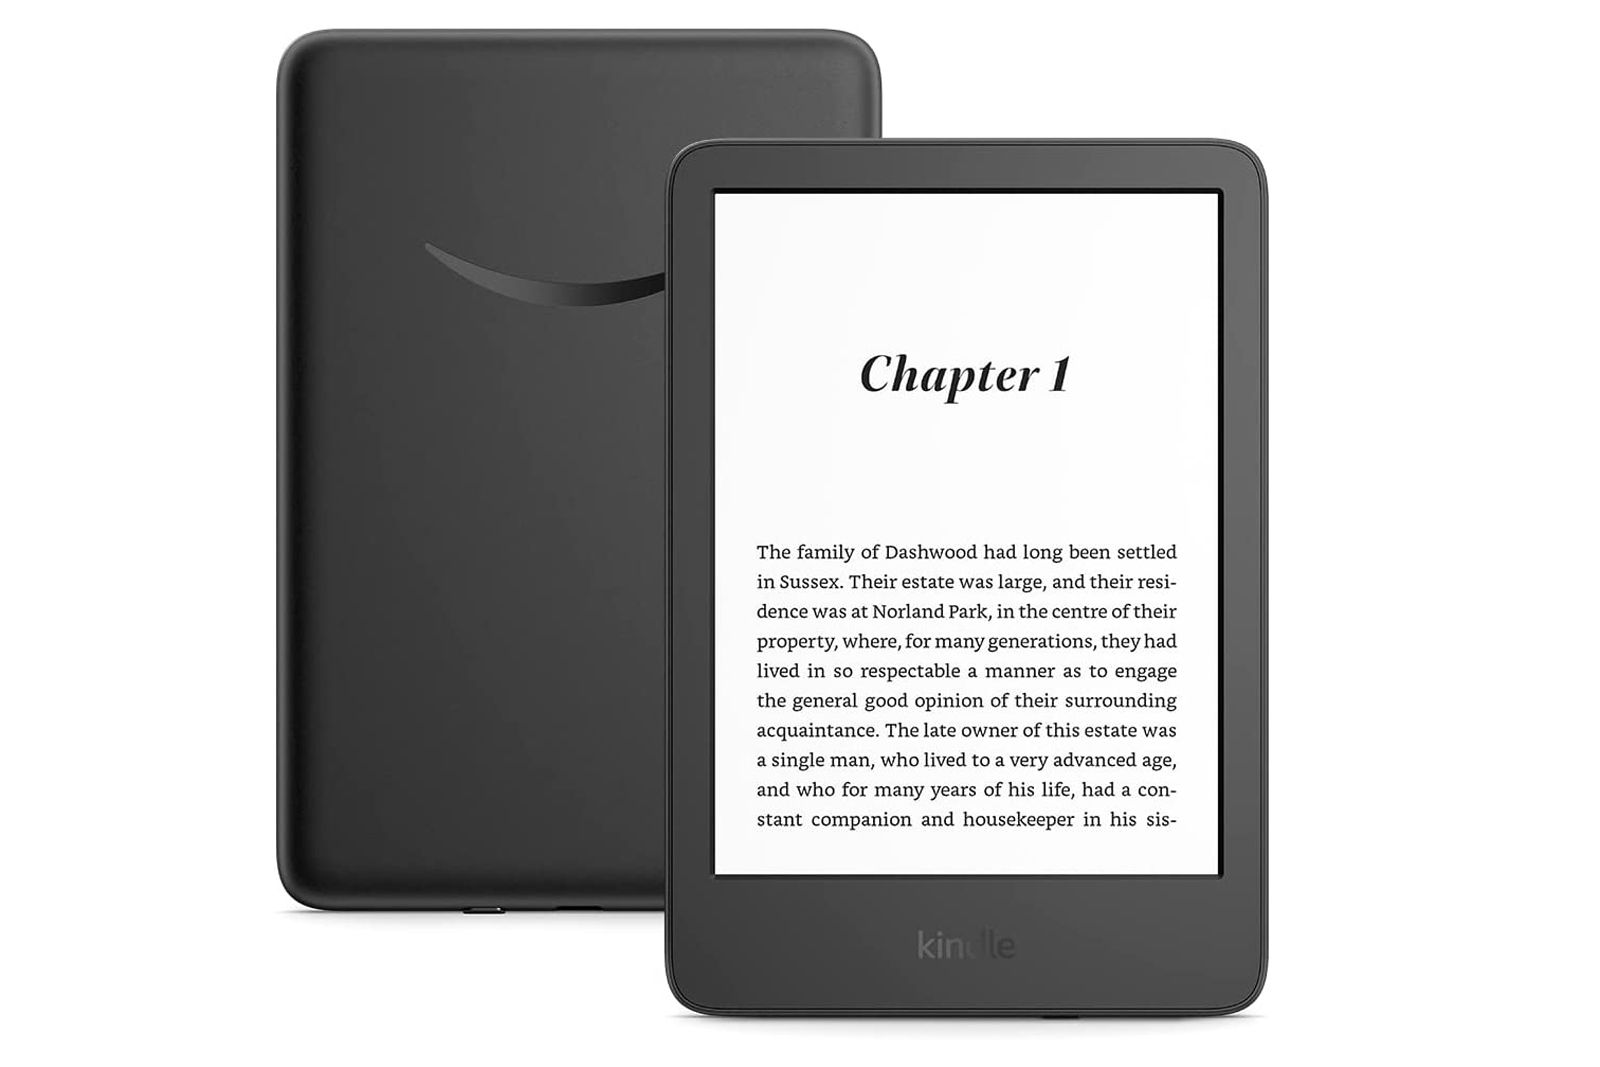 Amazon Kindle (2022) vs Kindle Paperwhite: Which to choose?